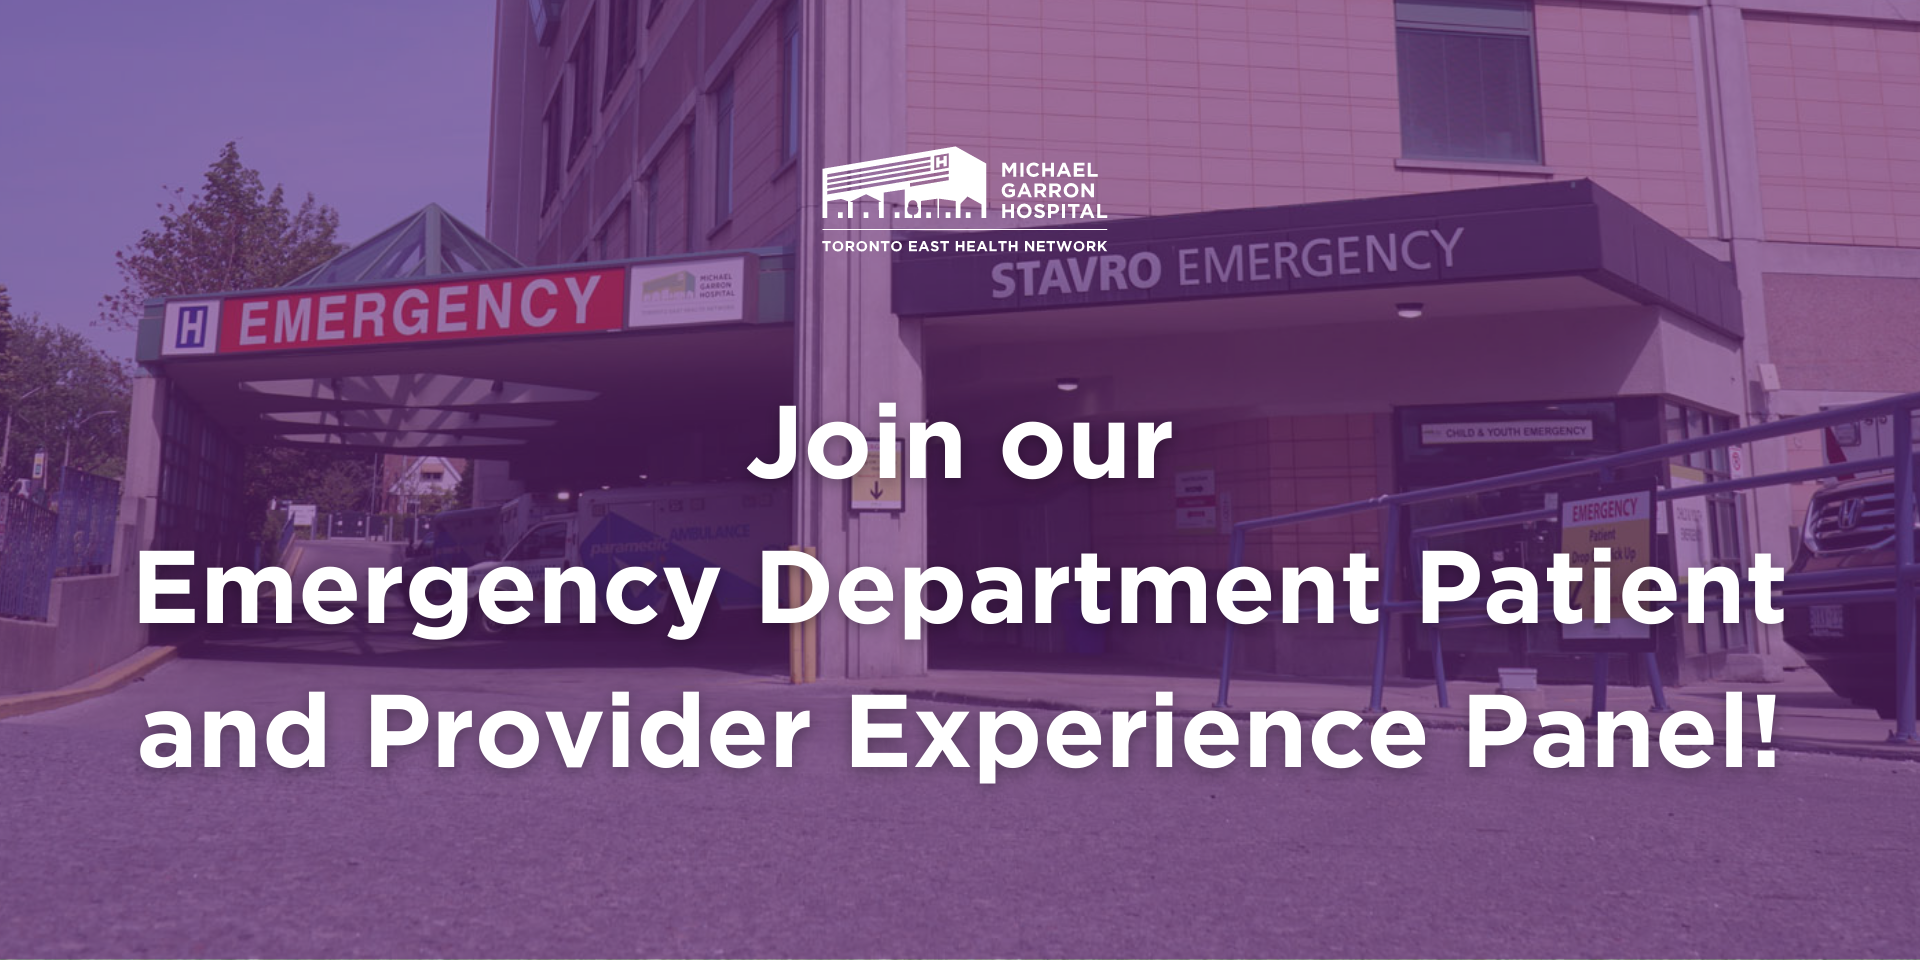 The MGH Emergency Department overlaid with the words "join our Emergency Department Patient and Provider Experience Panel"